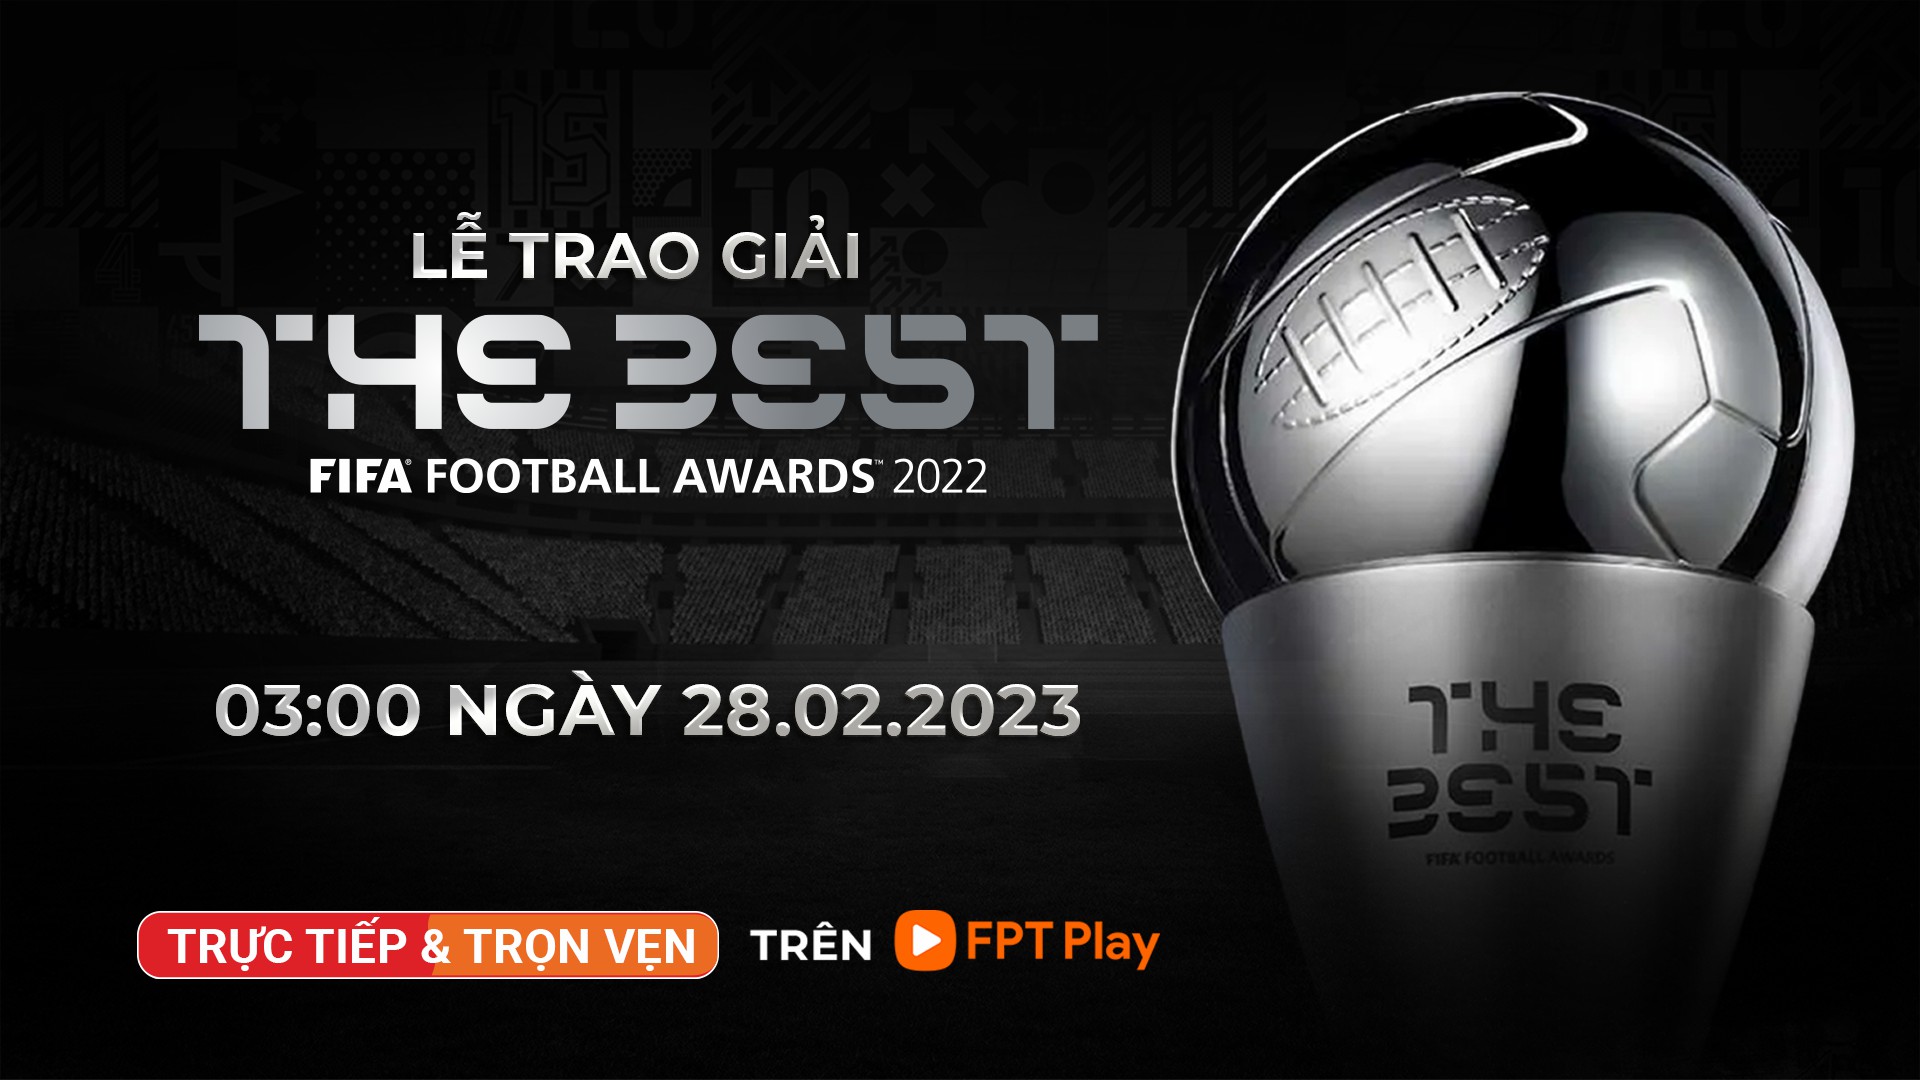 FIFA The Best 2022, FPT Play